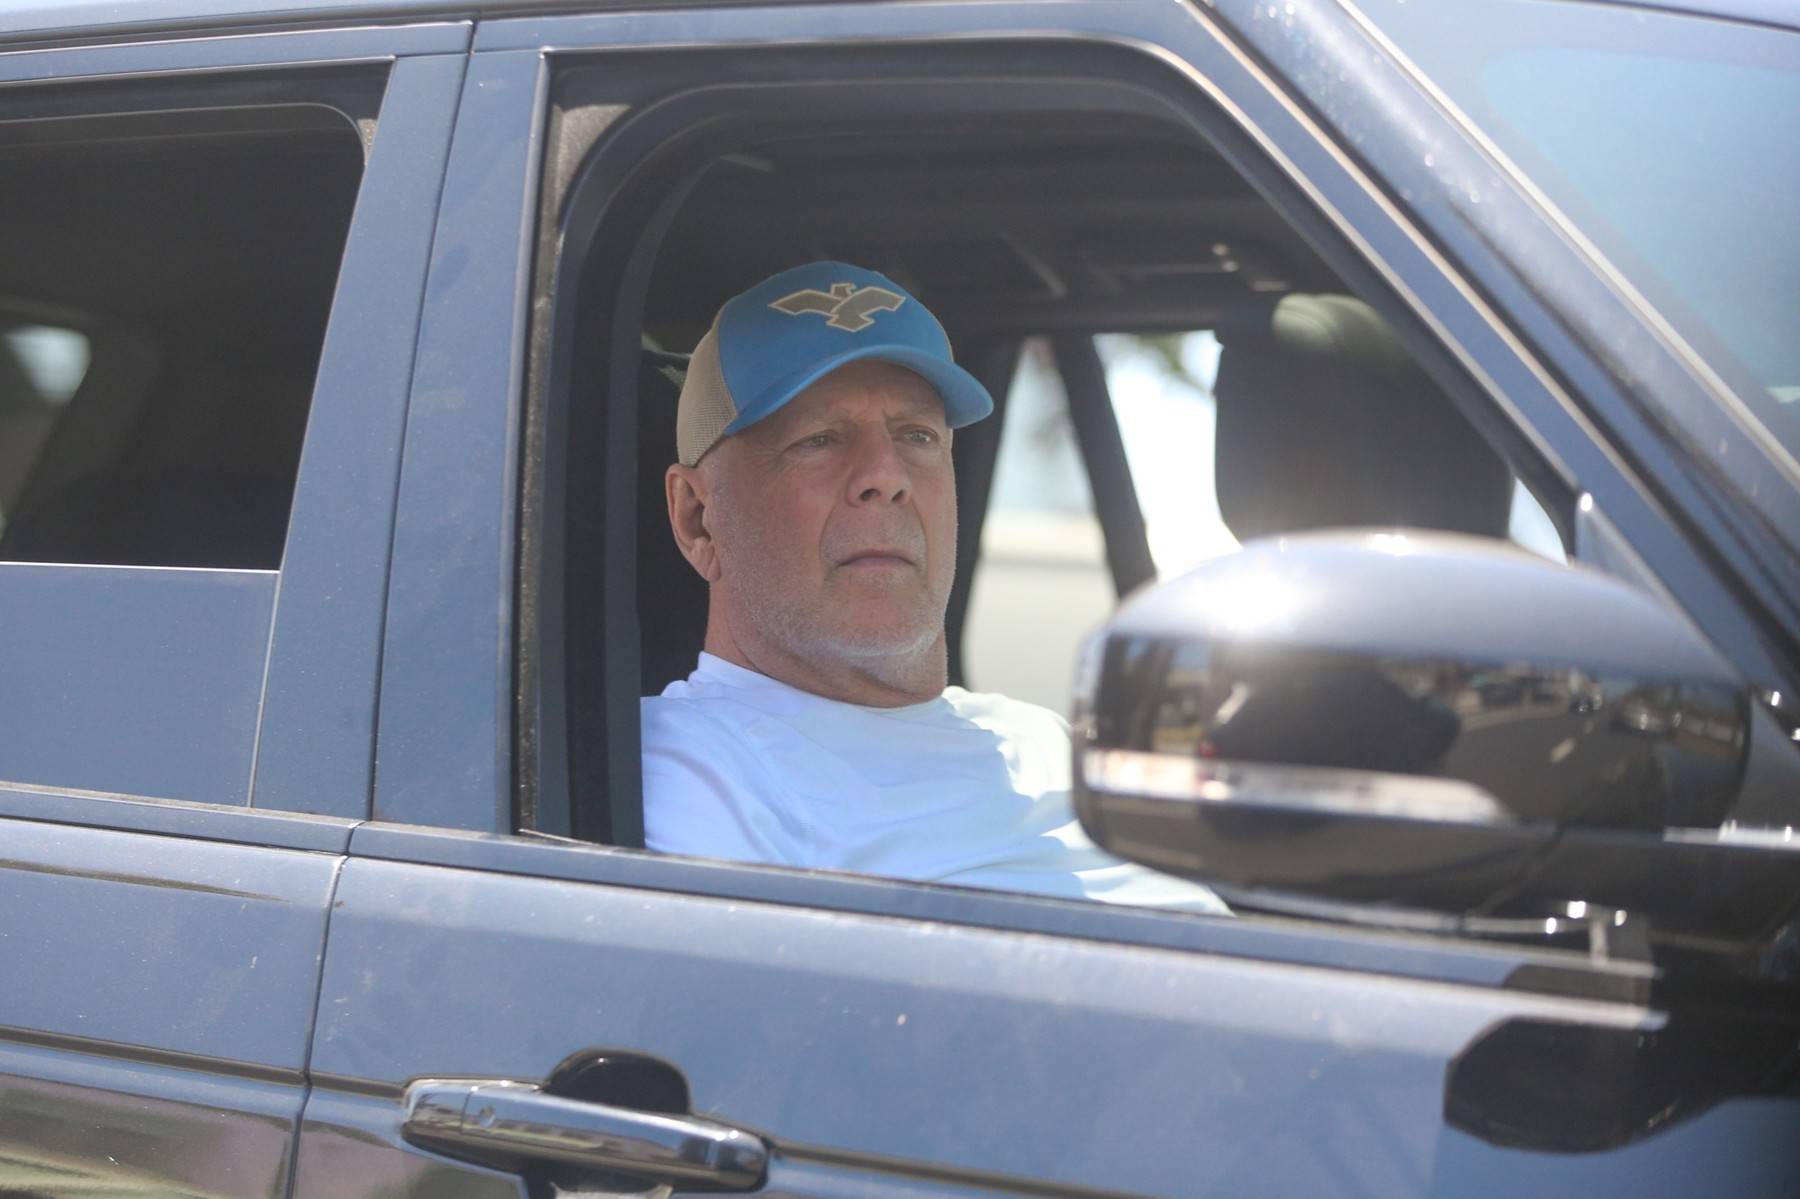 *EXCLUSIVE* Bruce Willis looking healthy and observing people on the street while out for a ride with a friend